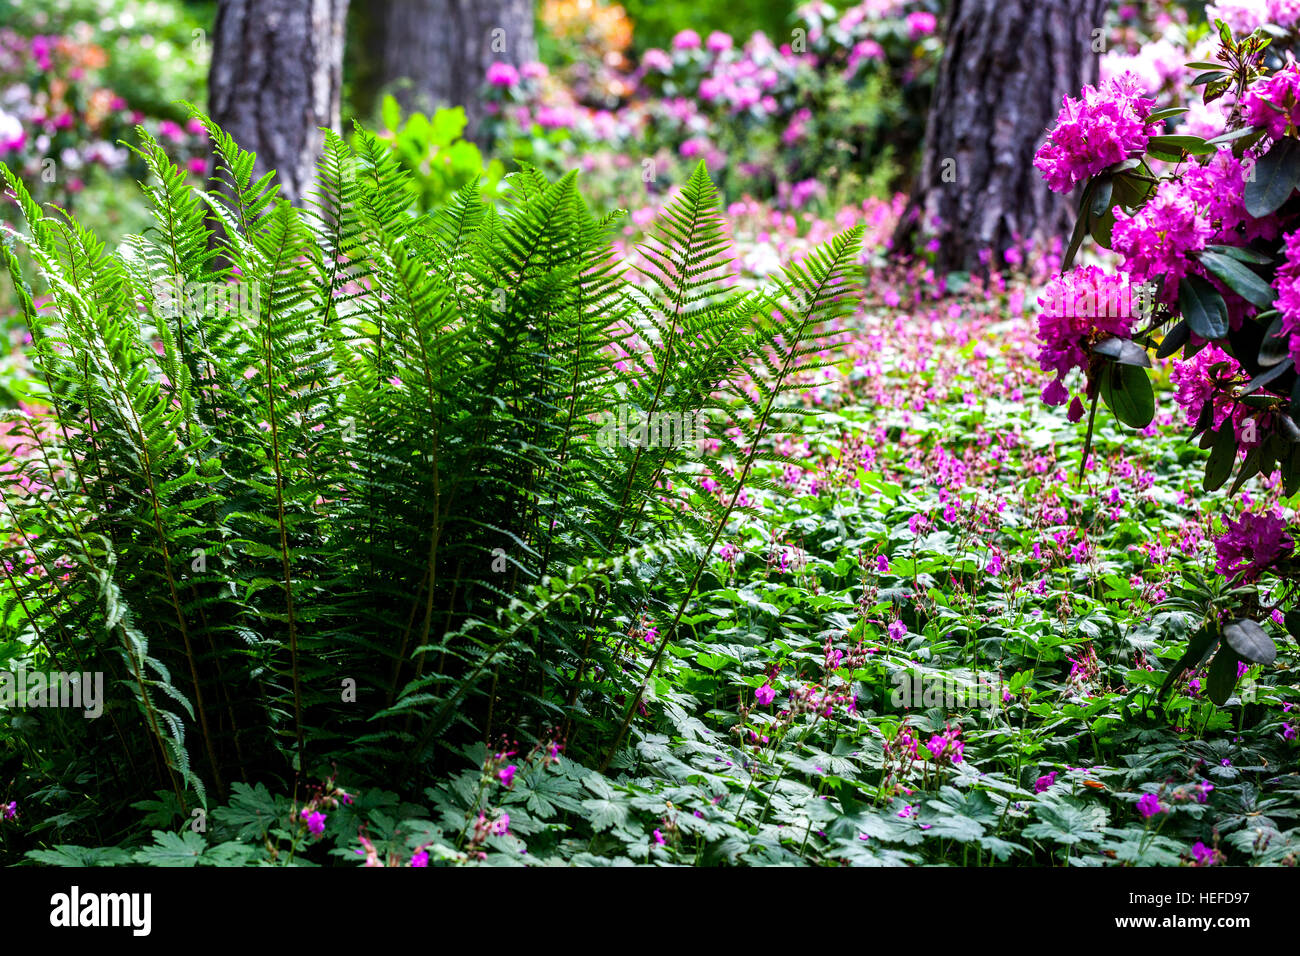 Growing ferns and under the pines and blooming rhododendrons, geranium as a ground cover flowering plant in garden woodland Stock Photo